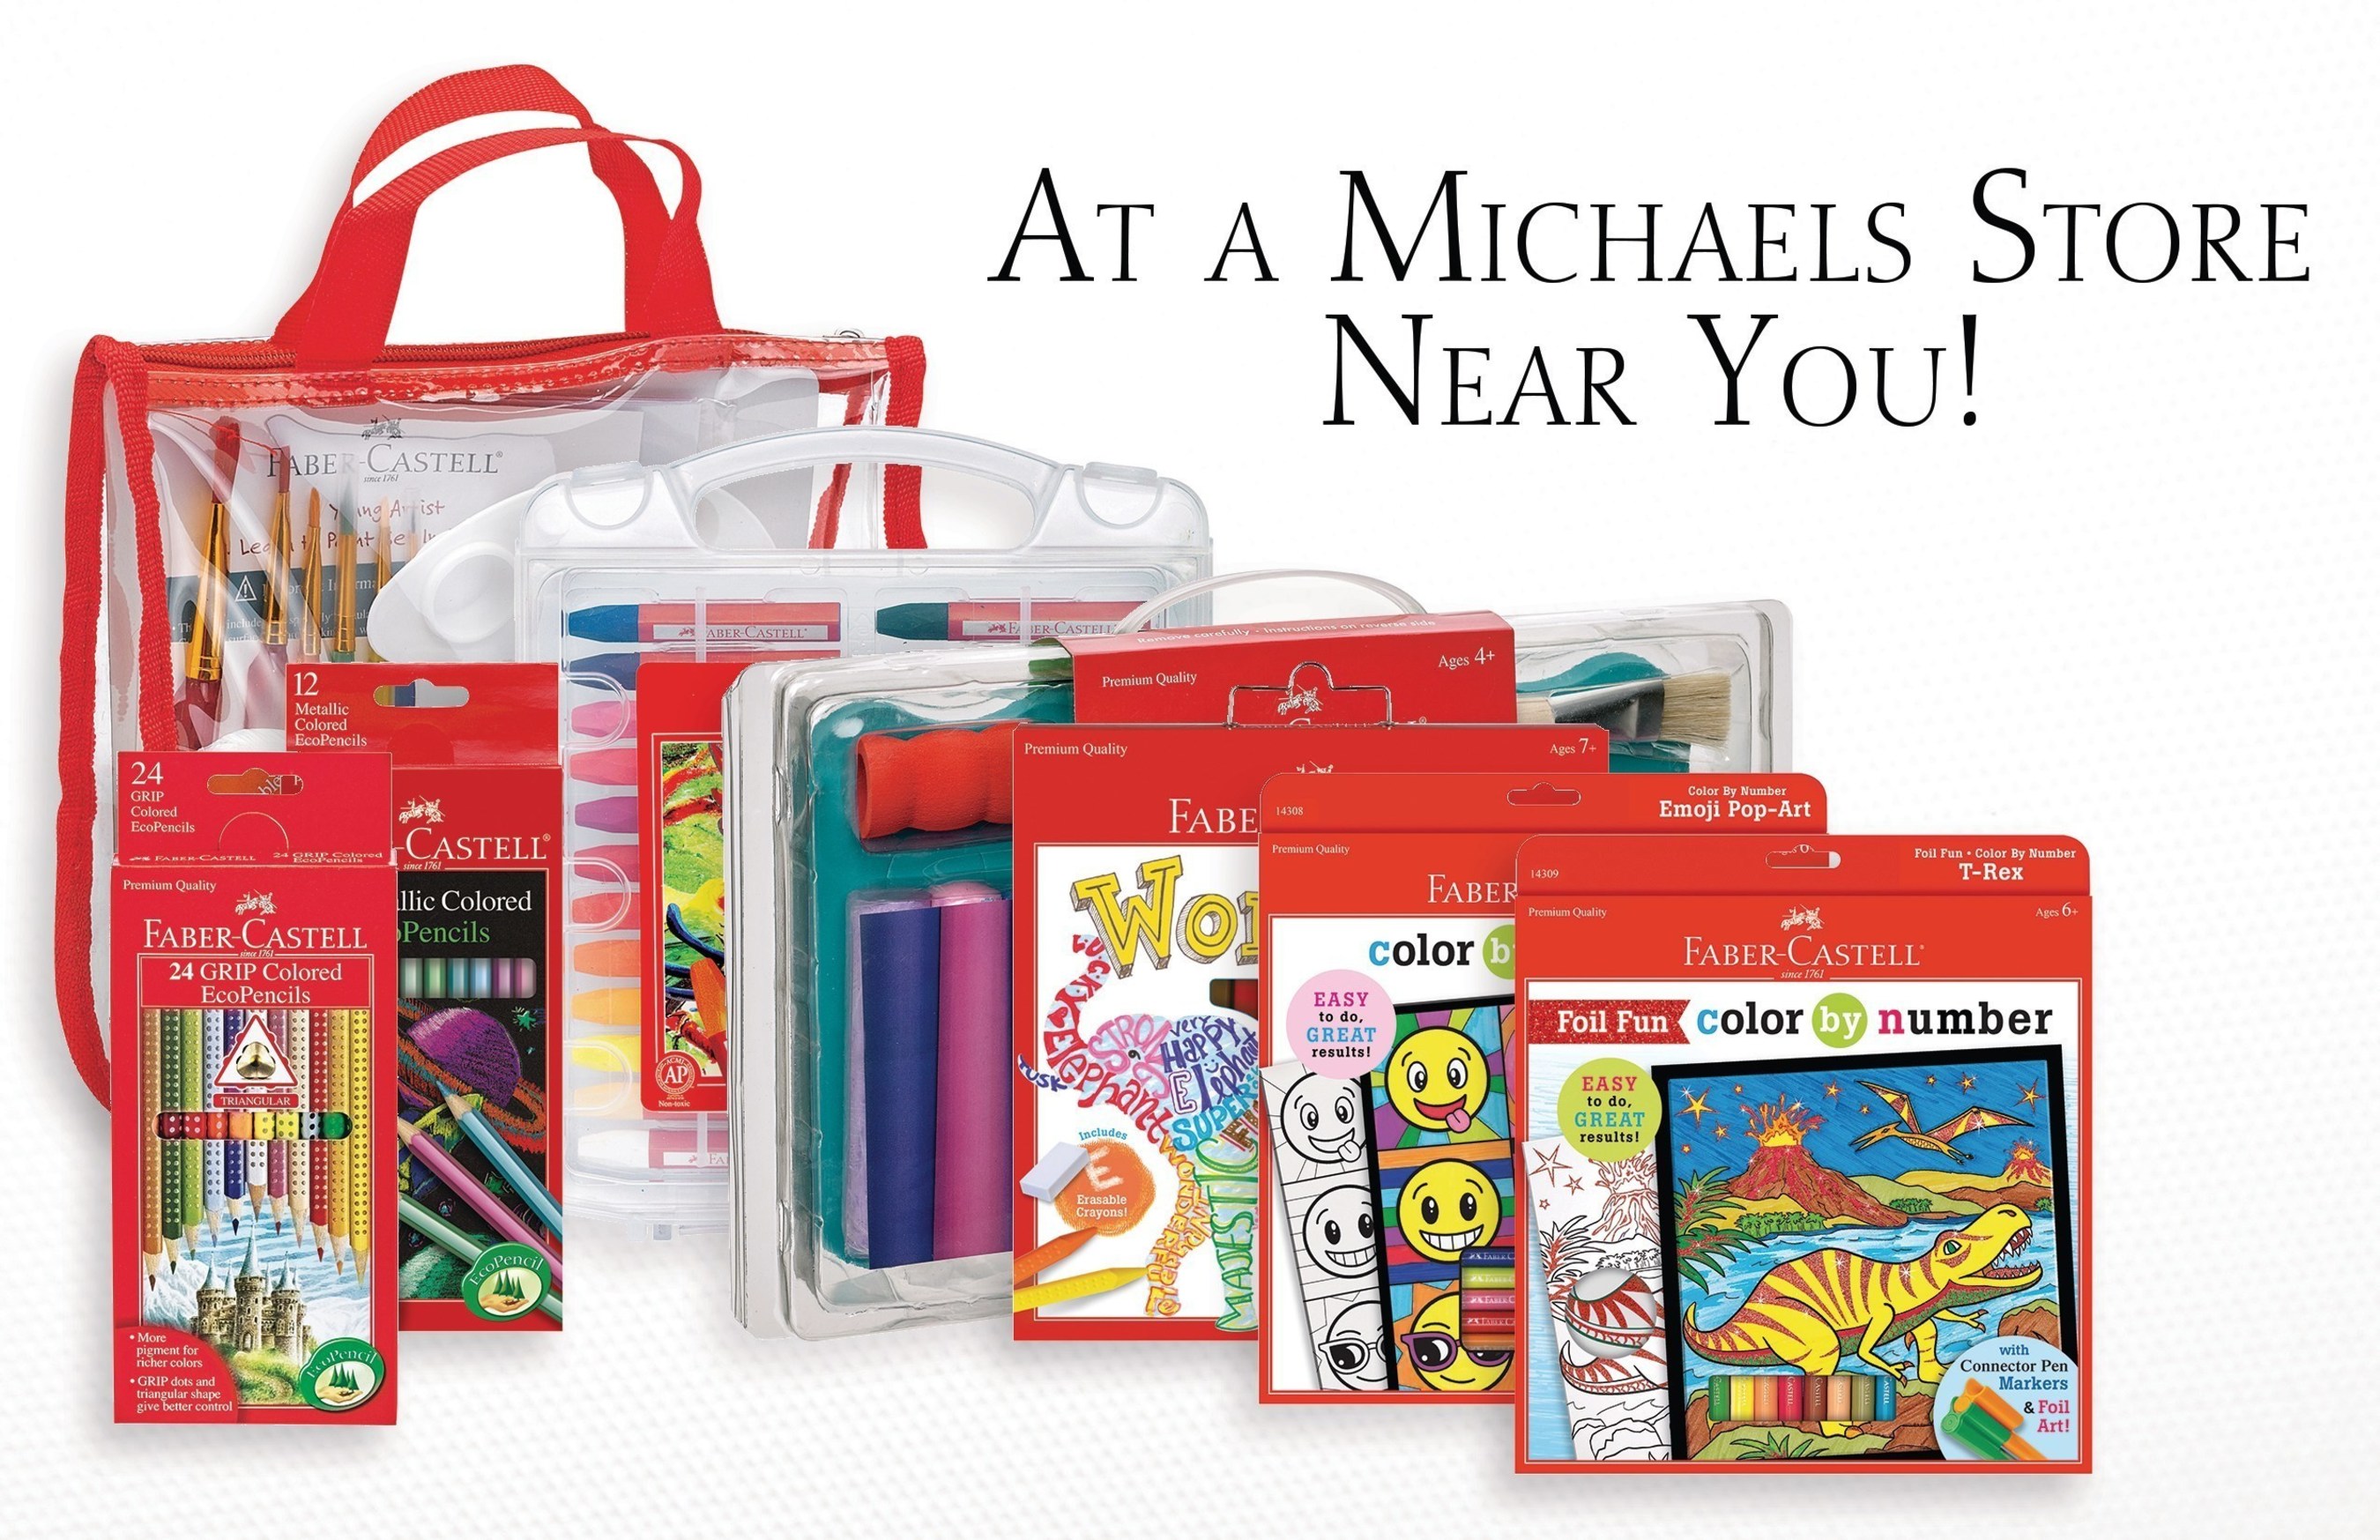 Faber-Castell Premium Children's Art Products are now available at Michaels stores, featuring new products like Do Art Word Art and Color by Number Emoji Pop-Art.